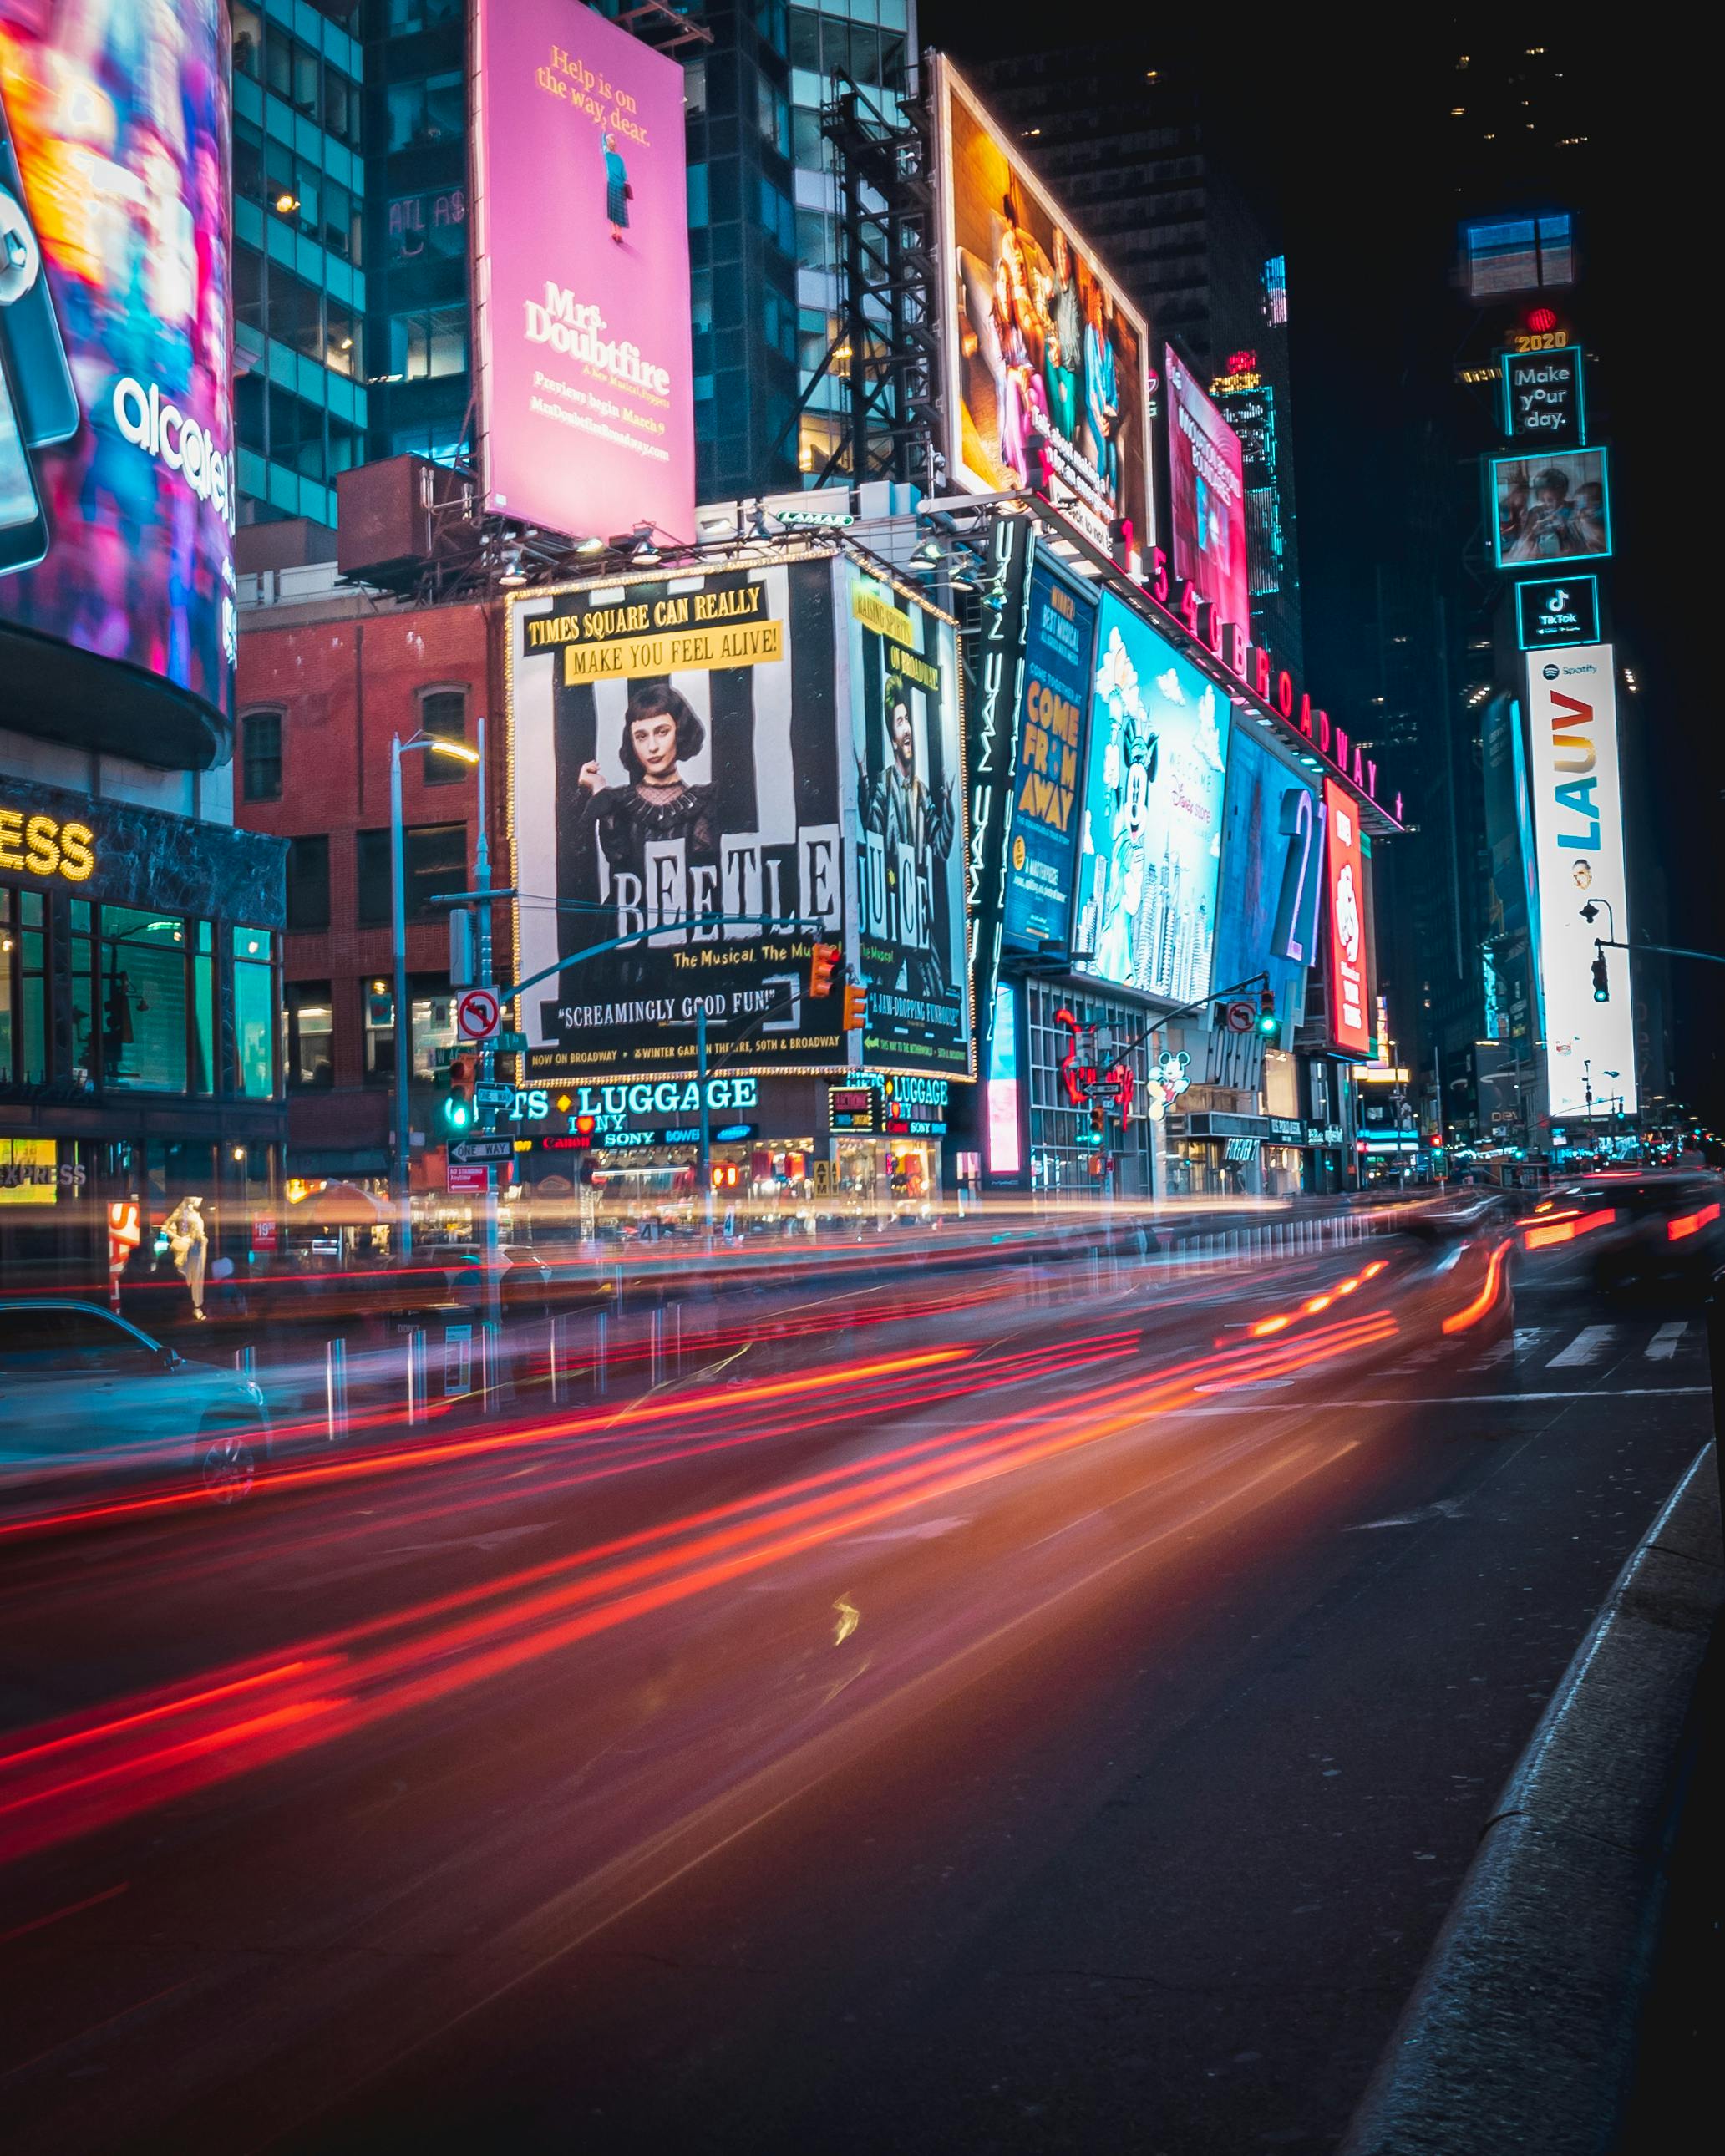 A depiction of New York's Times Square at night | Source: Pexels